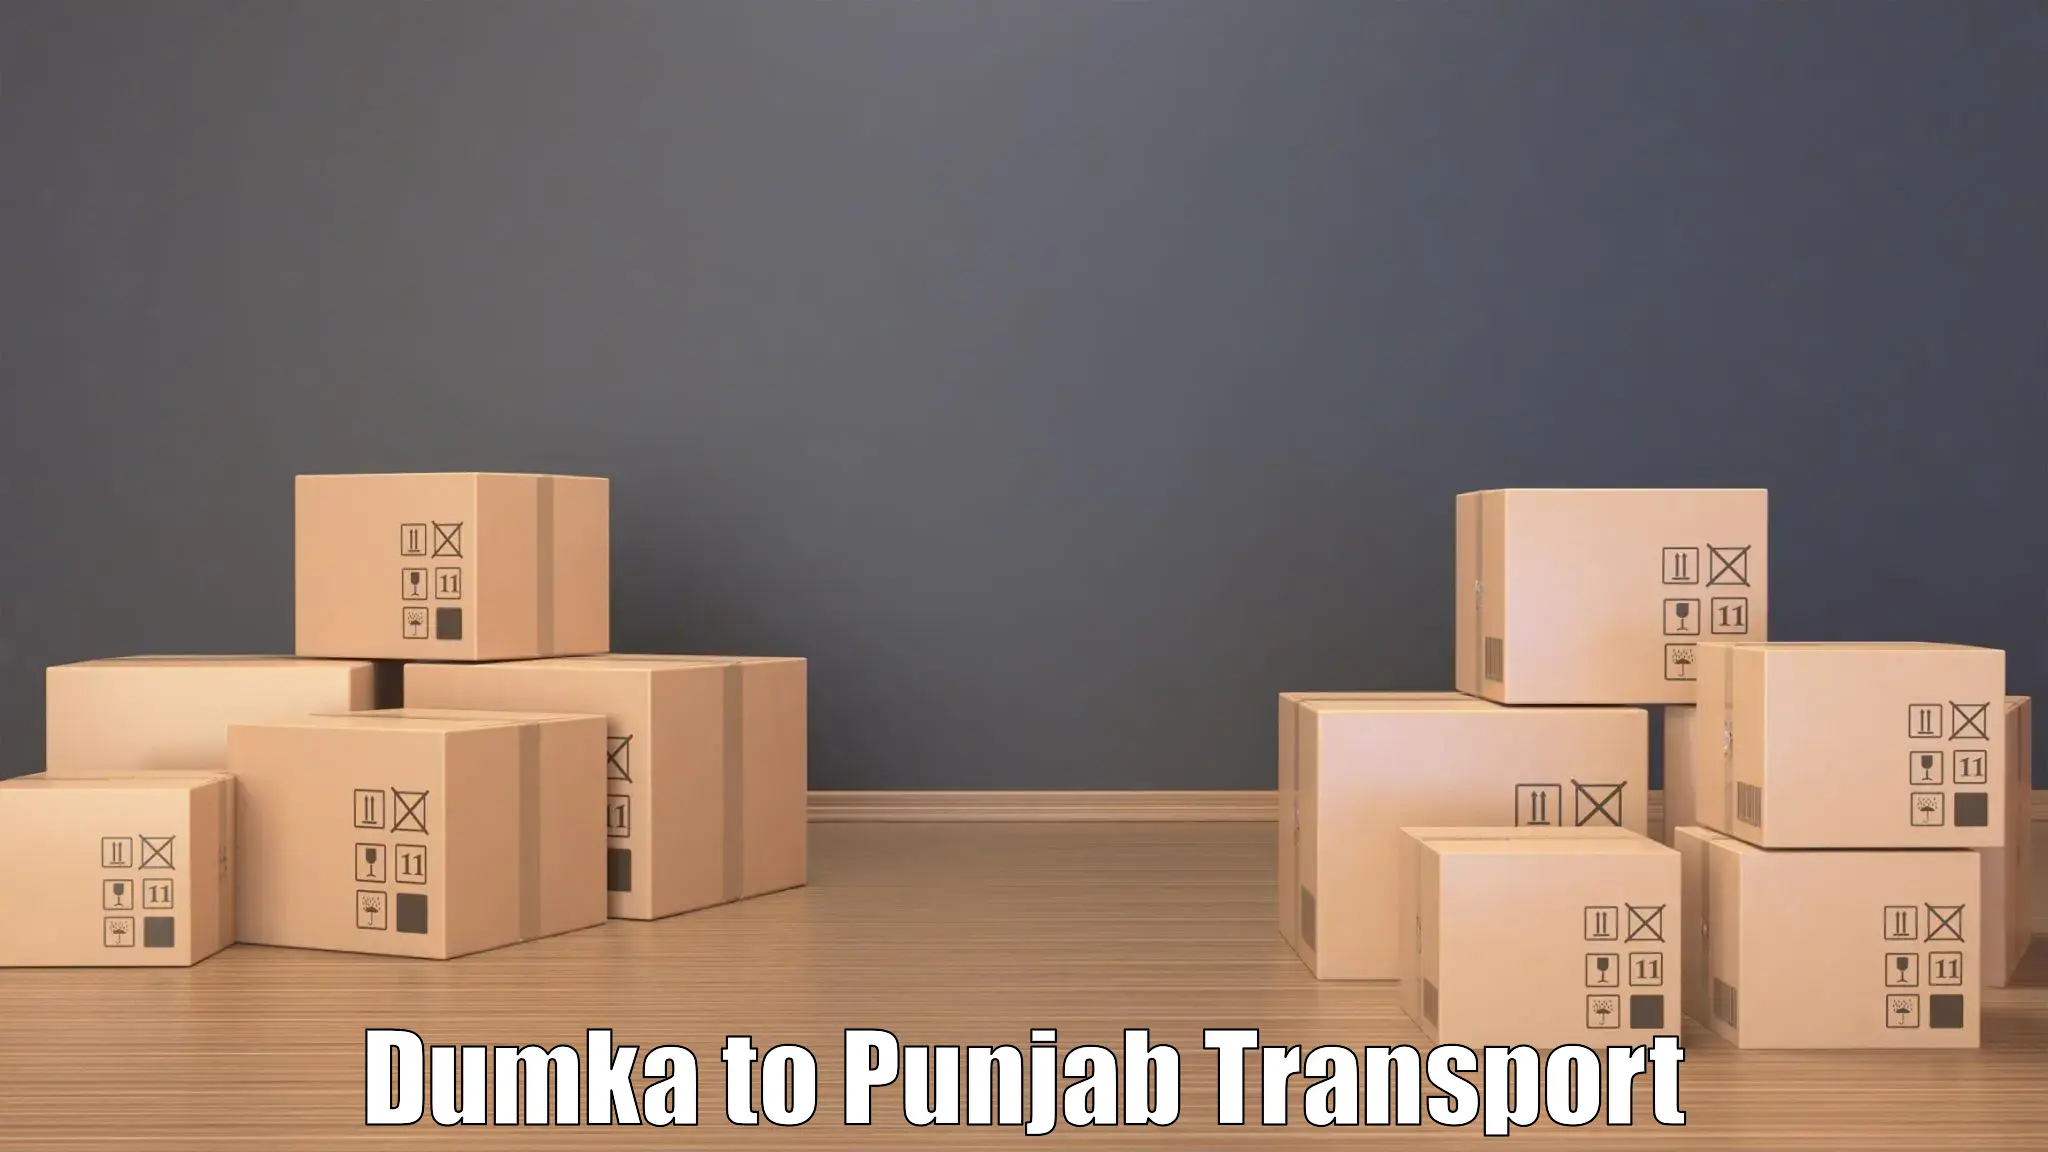 Nearby transport service Dumka to Malout